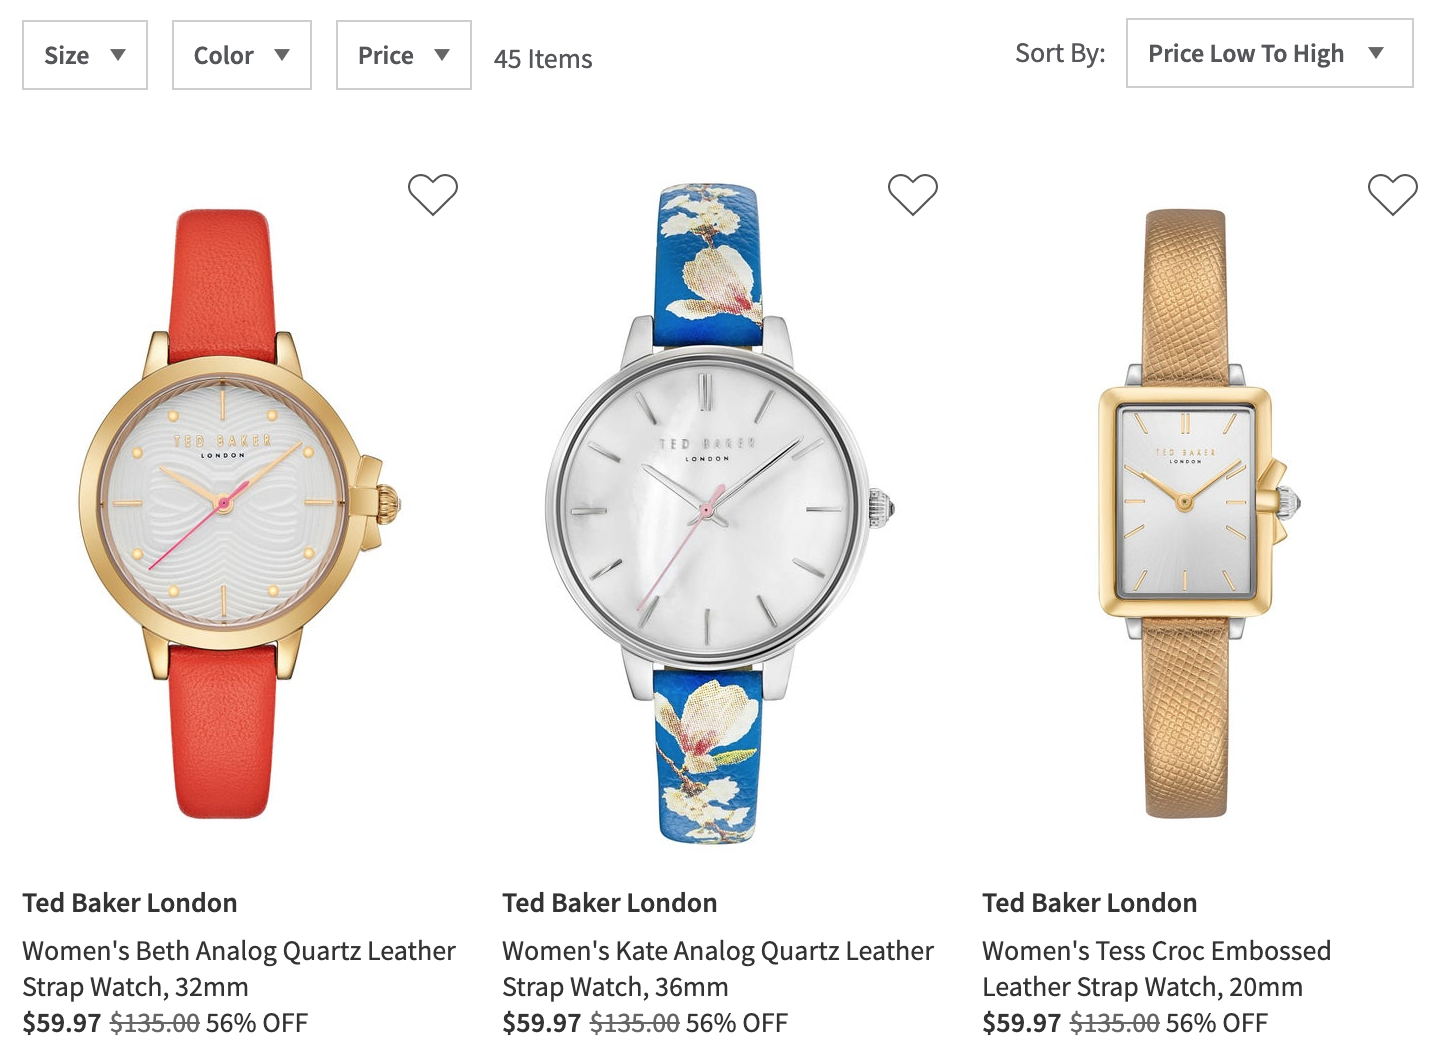 Ted Baker London Women Watches各类女士手表$59.97-$69.97 | Nordstrom Rack